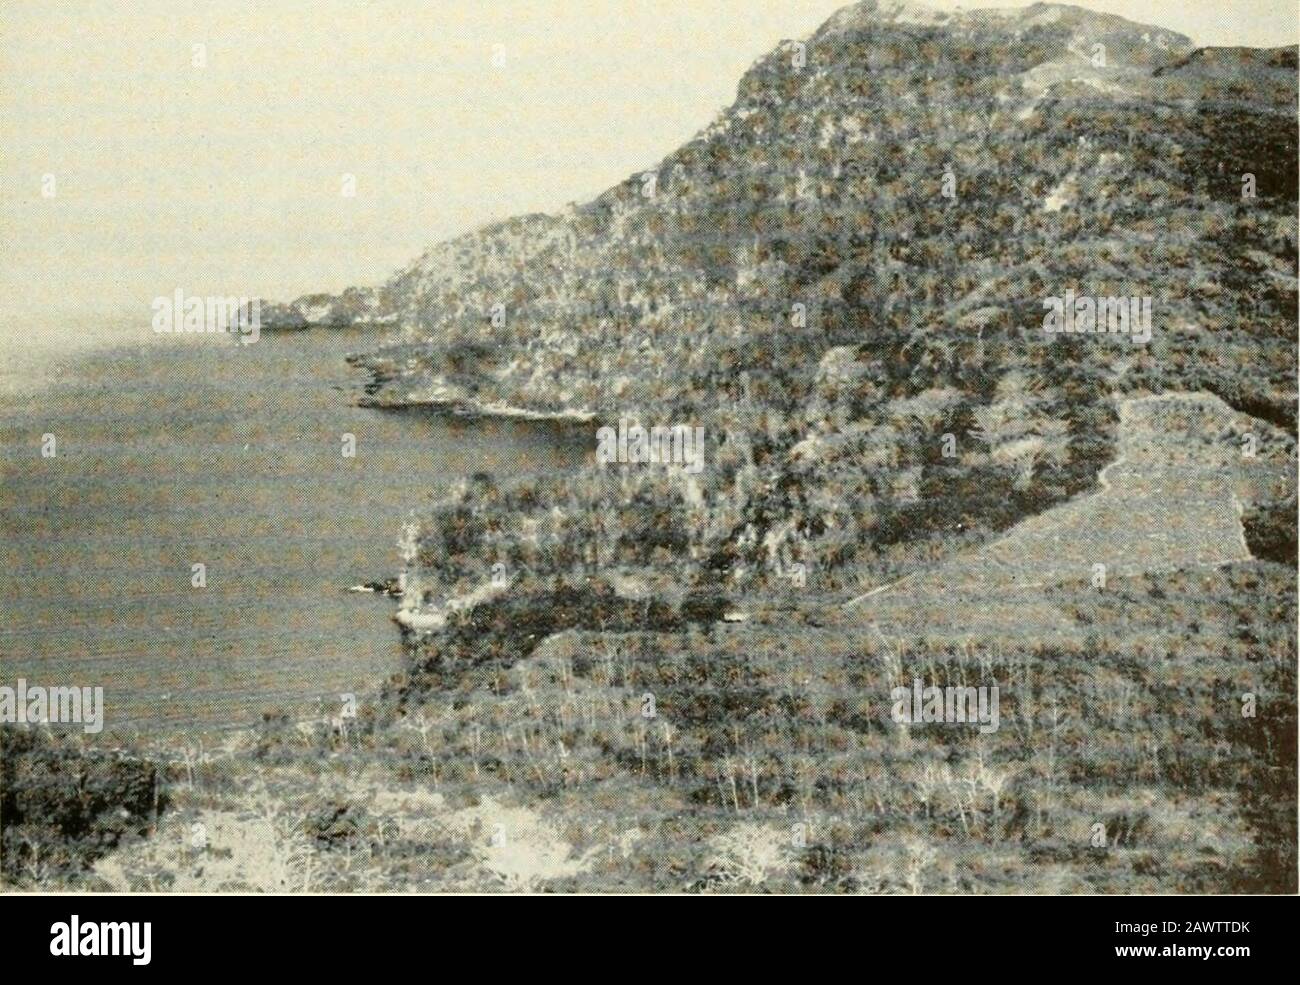 Smithsonian miscellaneous collections . 1. The: Village and Bay on Taboga Island, with the Islet El Morro AT THE Right March 17, 1952. 2. the Western Side of Taboga Island, Site of nesi ing ColoniesOF THE Brown Pelican Alarch 17, 1952 SMITHSONIAN MISCELLANEOUS COLLECTIONS VOL. 121, NO. 2, PL. 2 .amiS^- Stock Photo